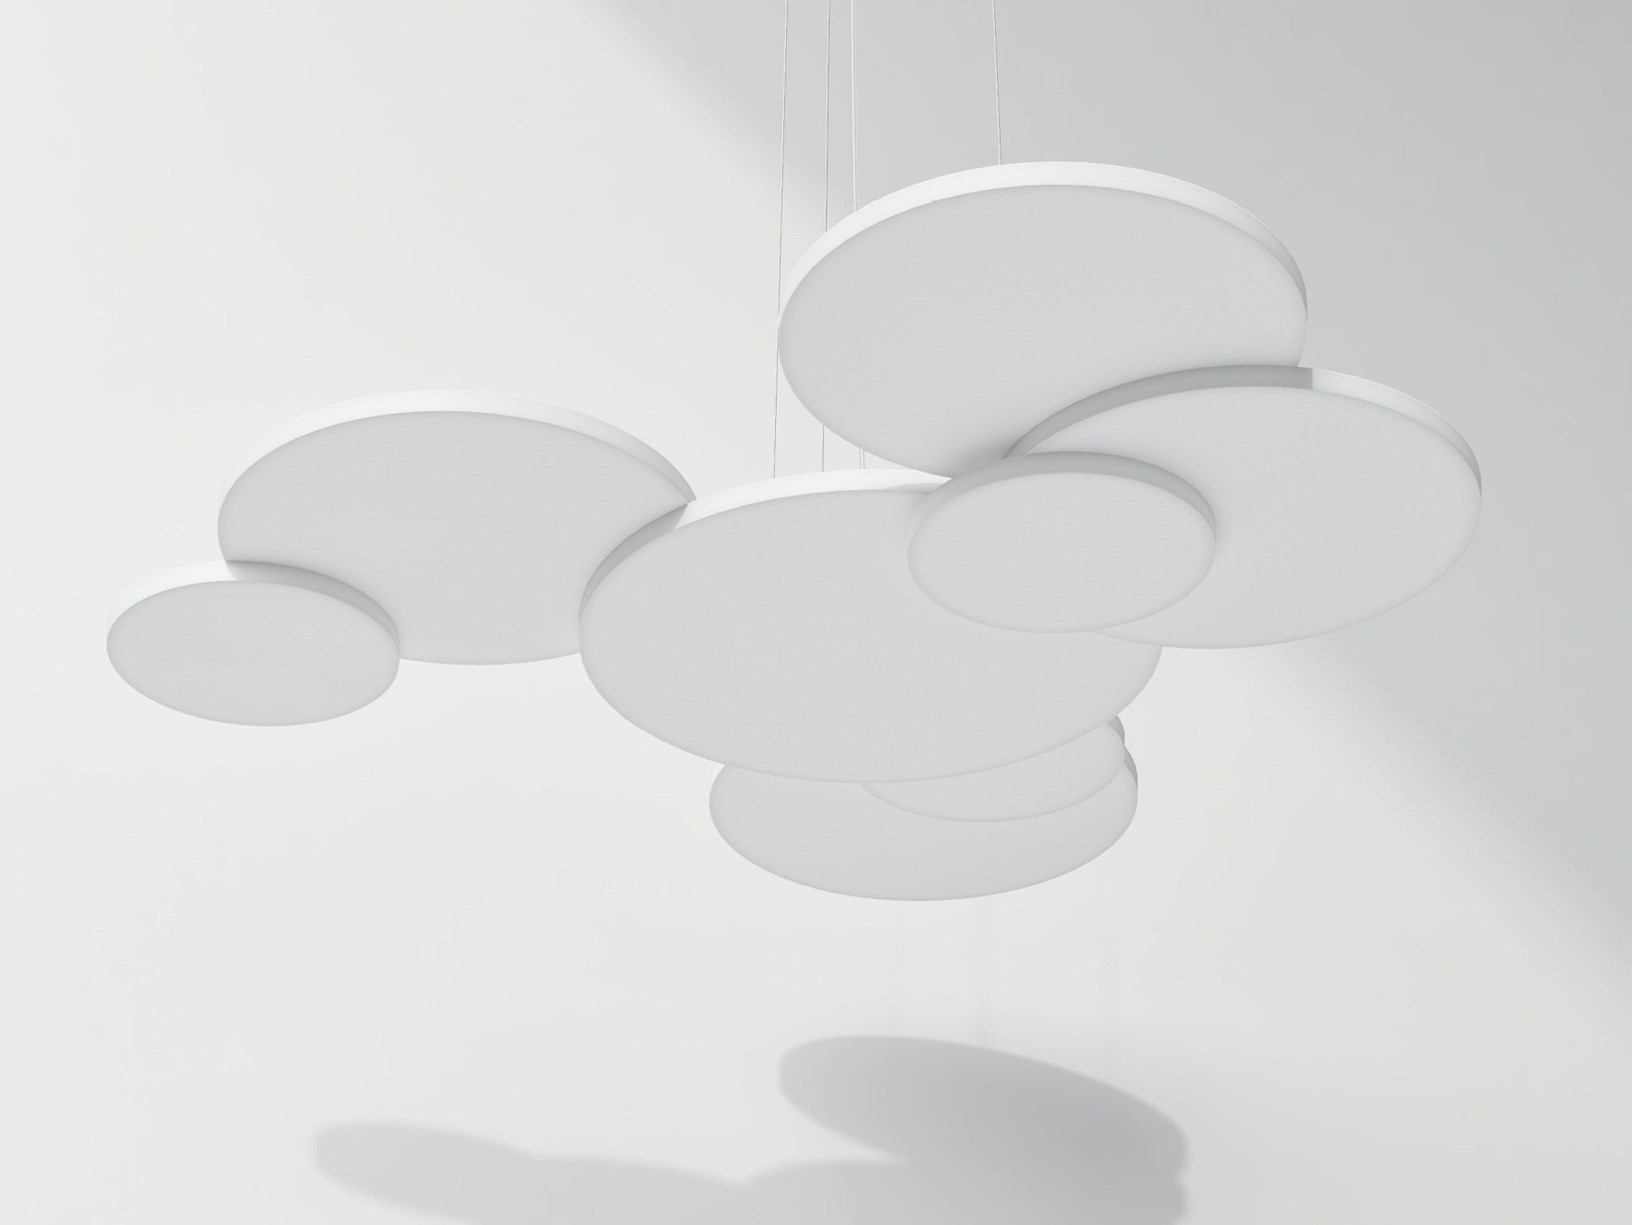 Two New 'Choreographic' and Functional Lamps "Eden" and "Overlap"